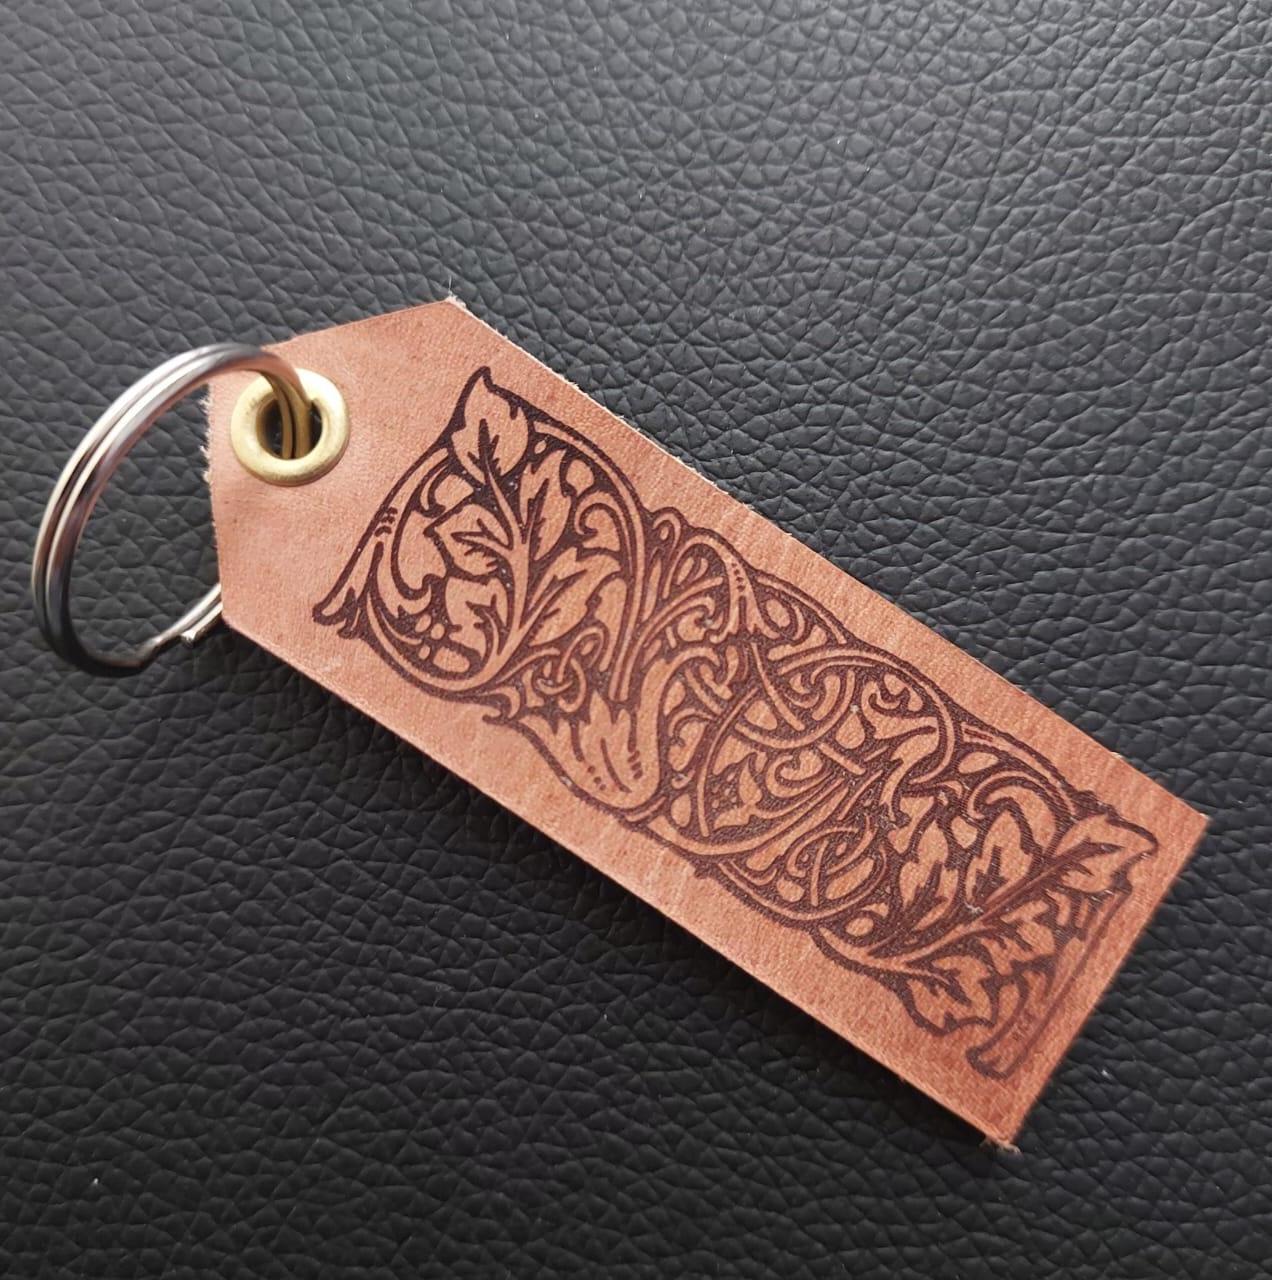 How to Make a Leather Keychain/Keyring/Keyholder